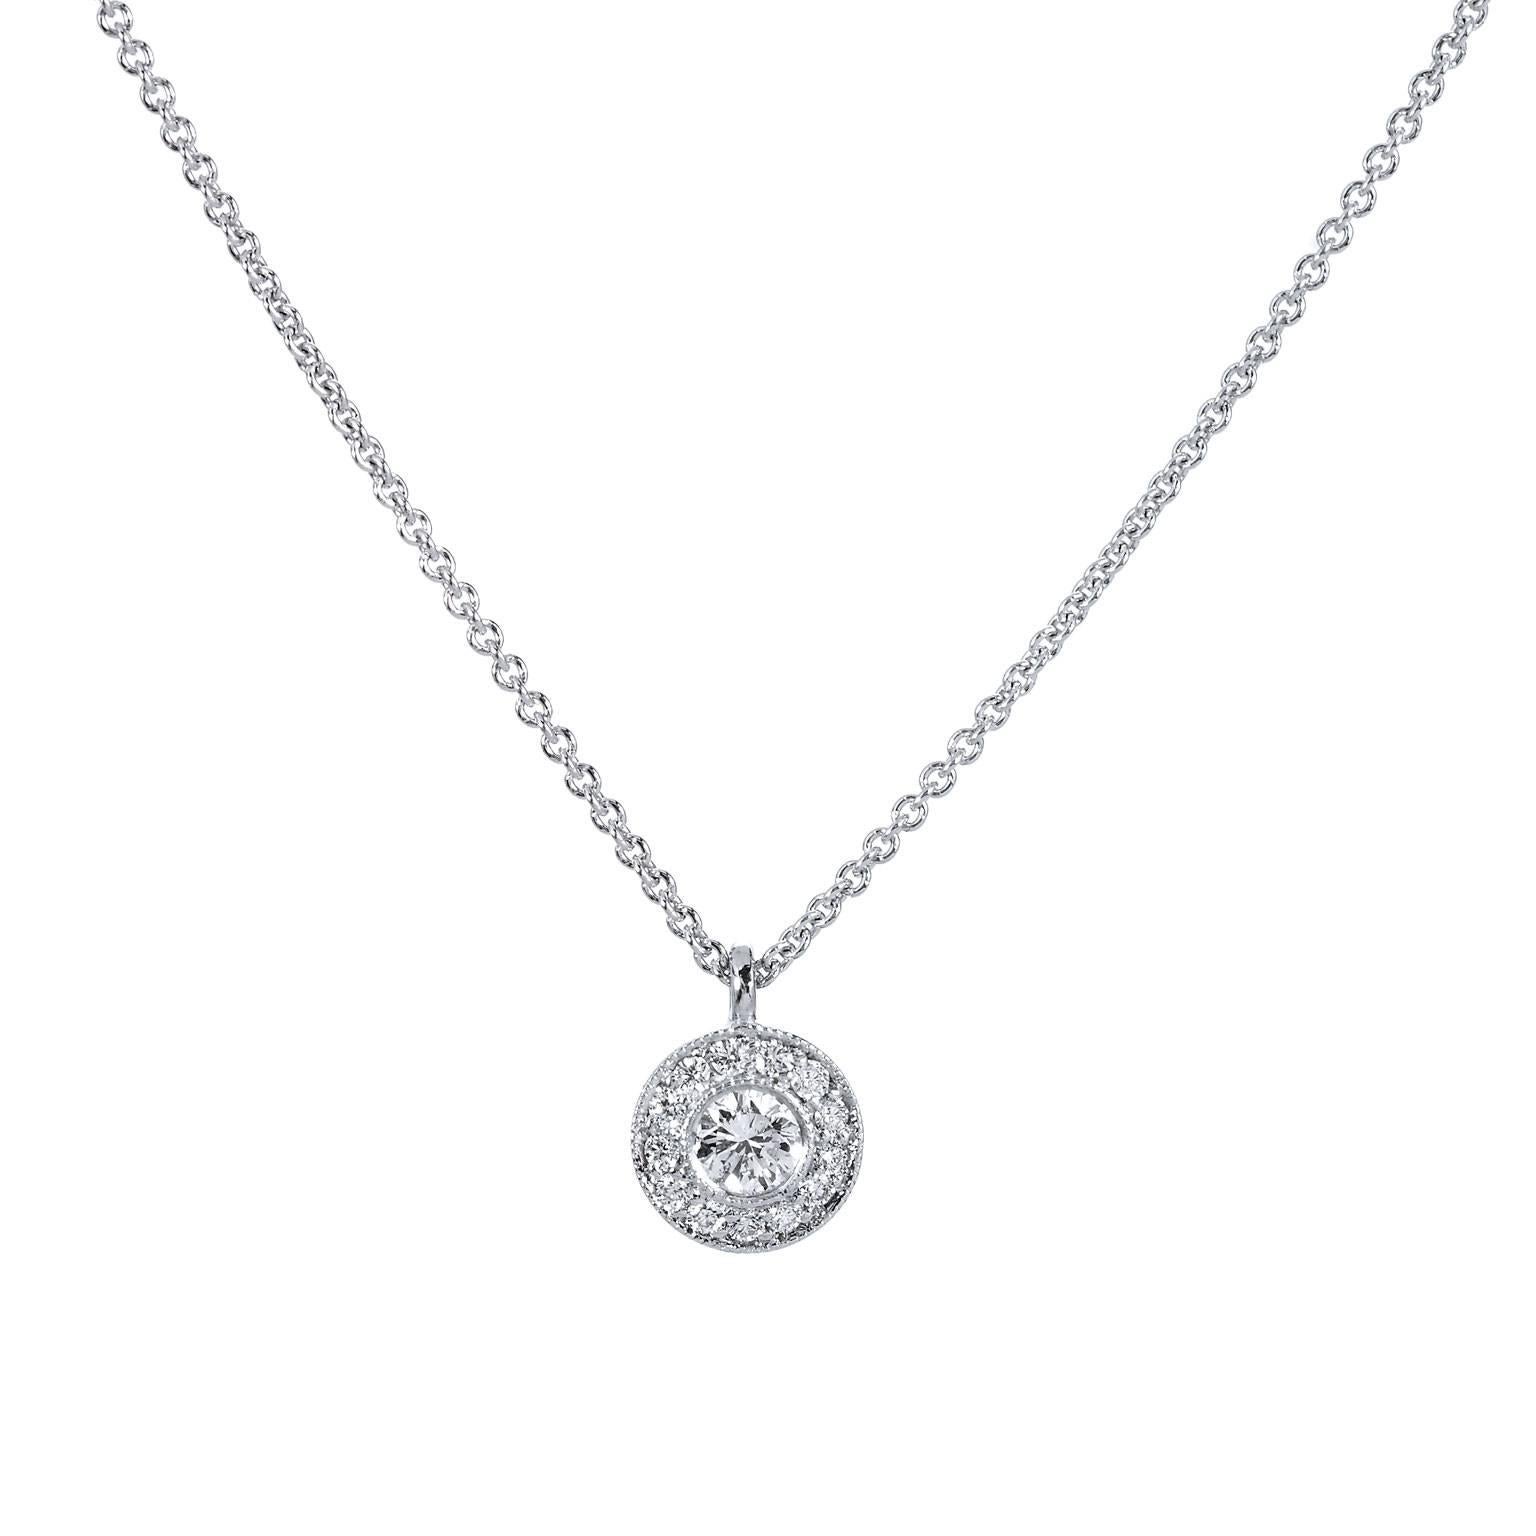 Fashioned in 18 karat white gold, this pendant features a 0.09 carat round brilliant cut diamond set at center (H/SI2) and embraced by 0.05 carat of pave set diamond on the perimeter (H/VS1). Make this necklace a staple jewelry piece in your